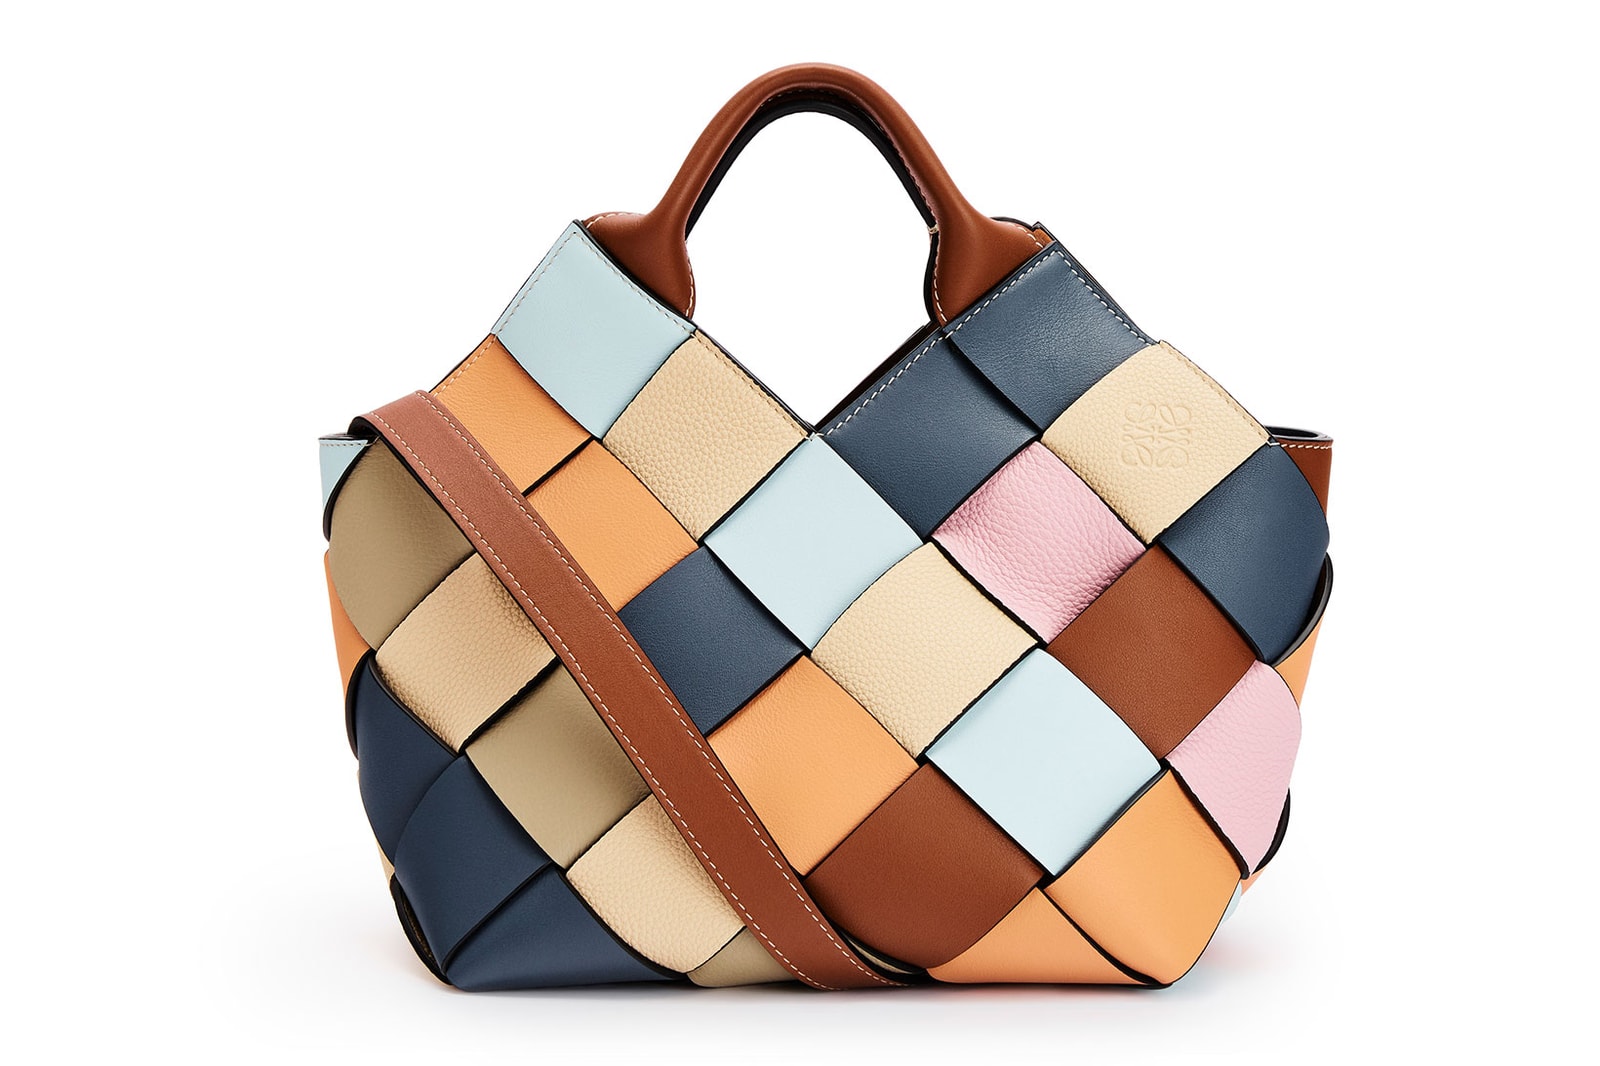 loewe the surplus project woven basket handbags sustainable leather accessories release where to buy 